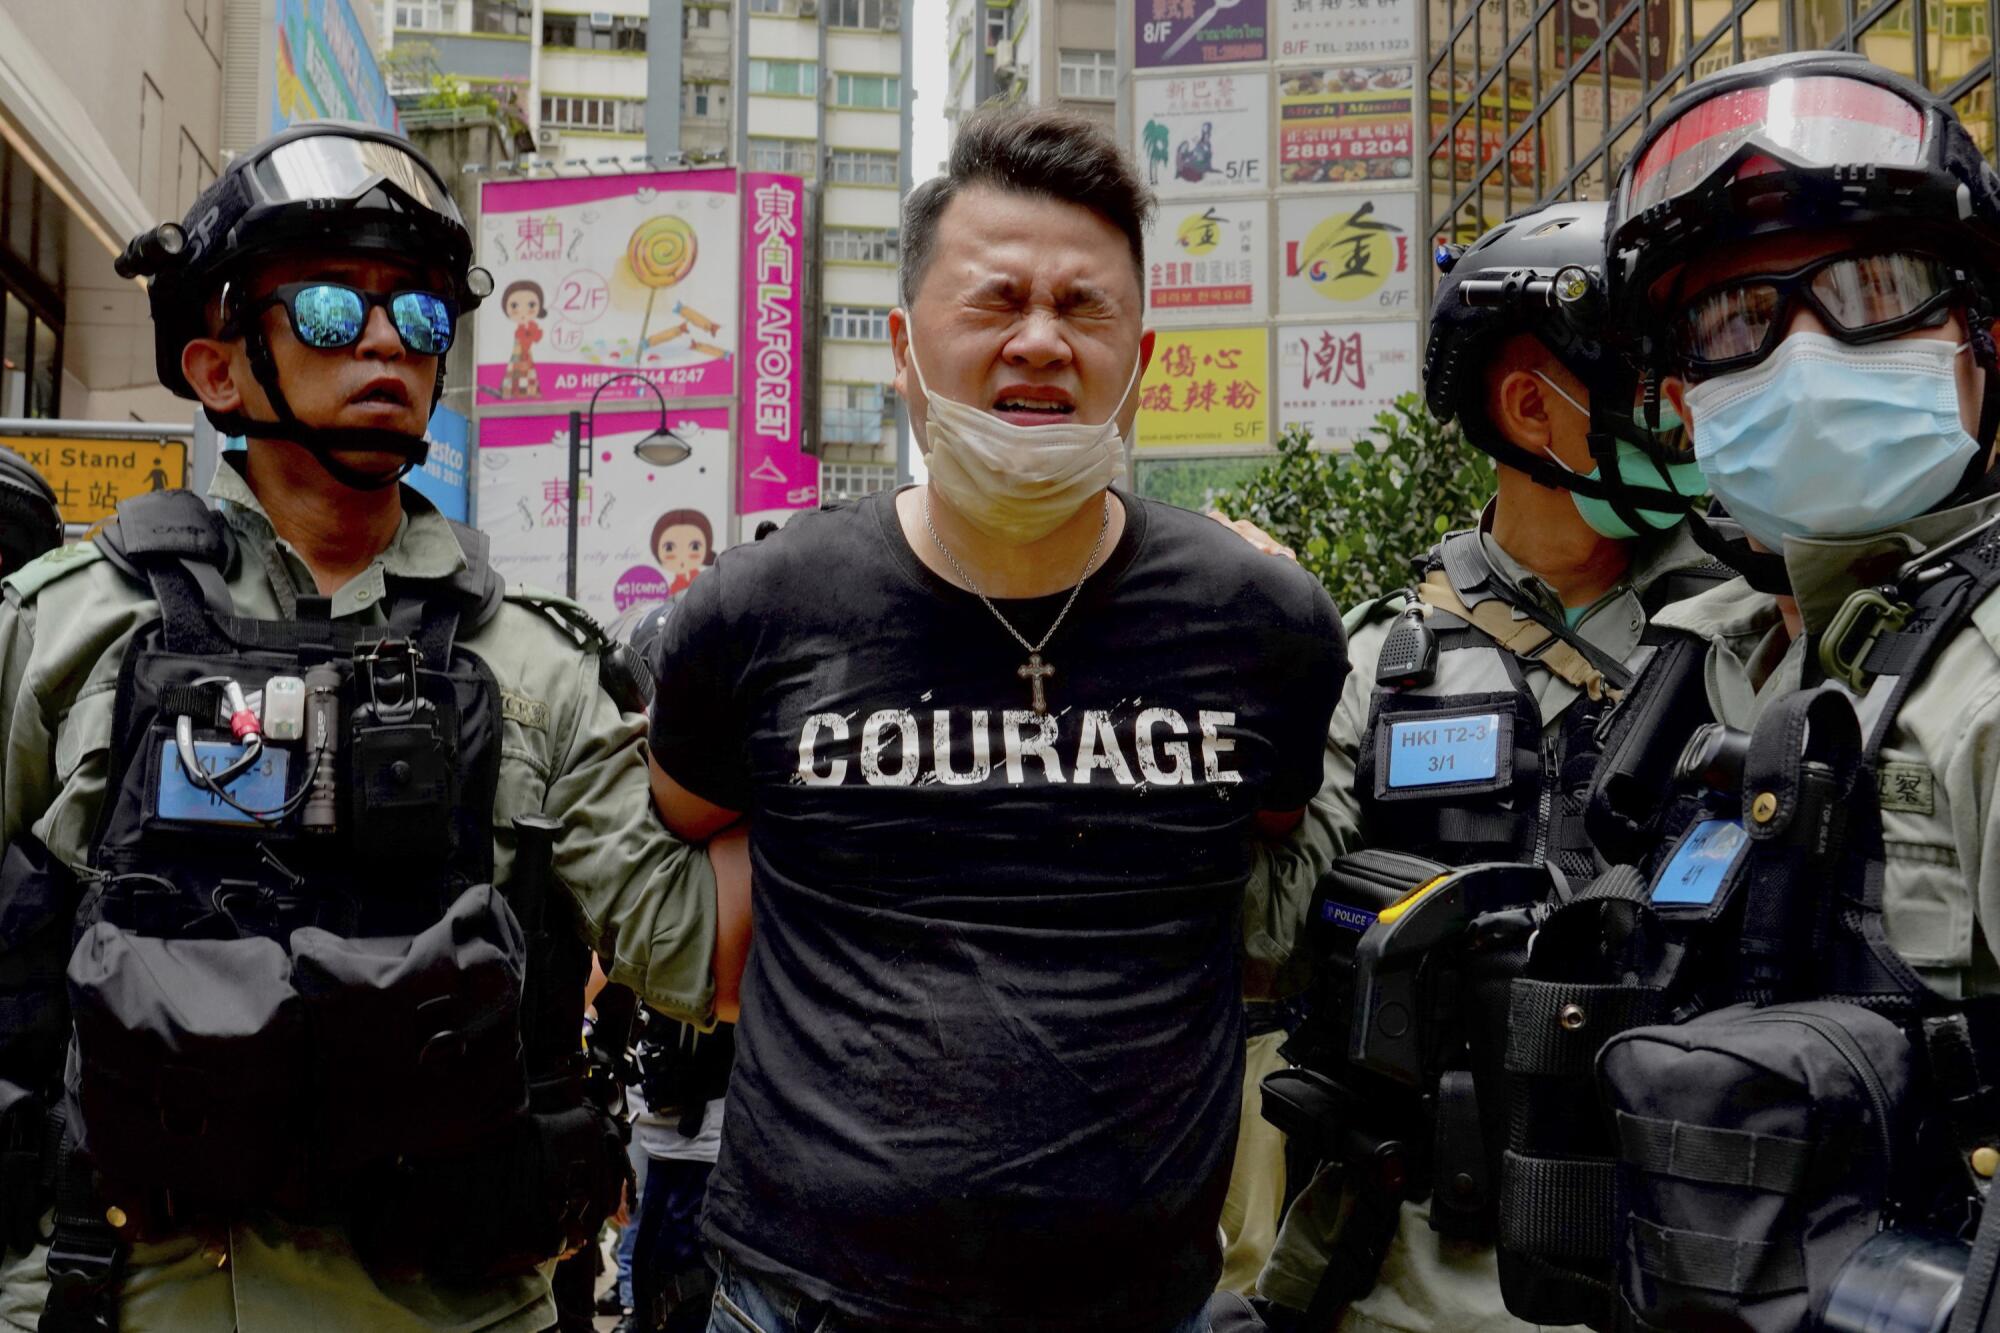 Police detain a protester after being sprayed with pepper spray during a protest in Causeway Bay 